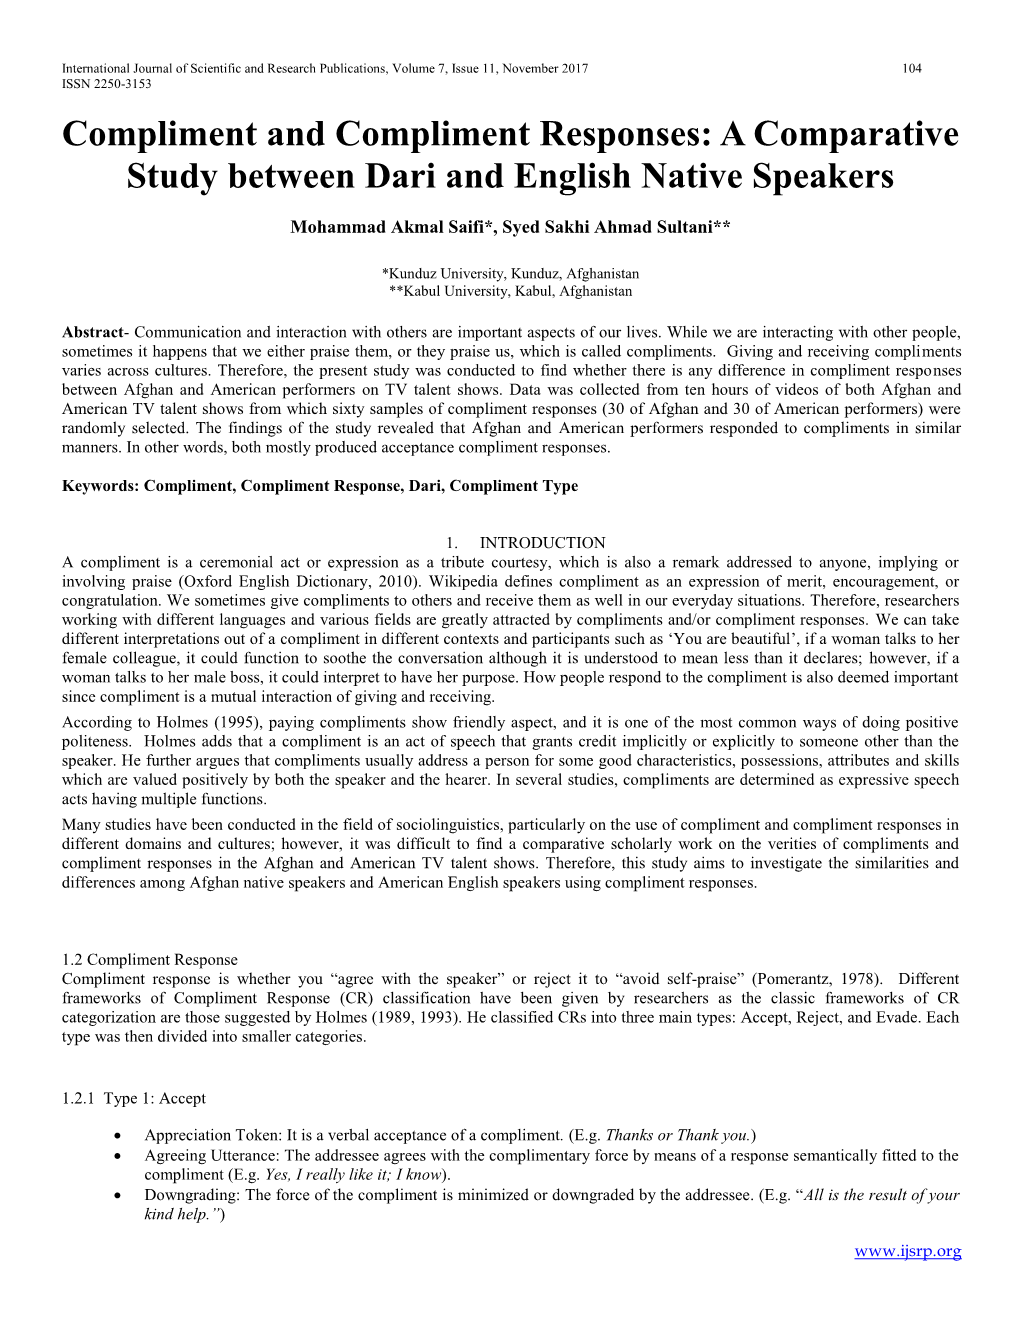 A Comparative Study Between Dari and English Native Speakers